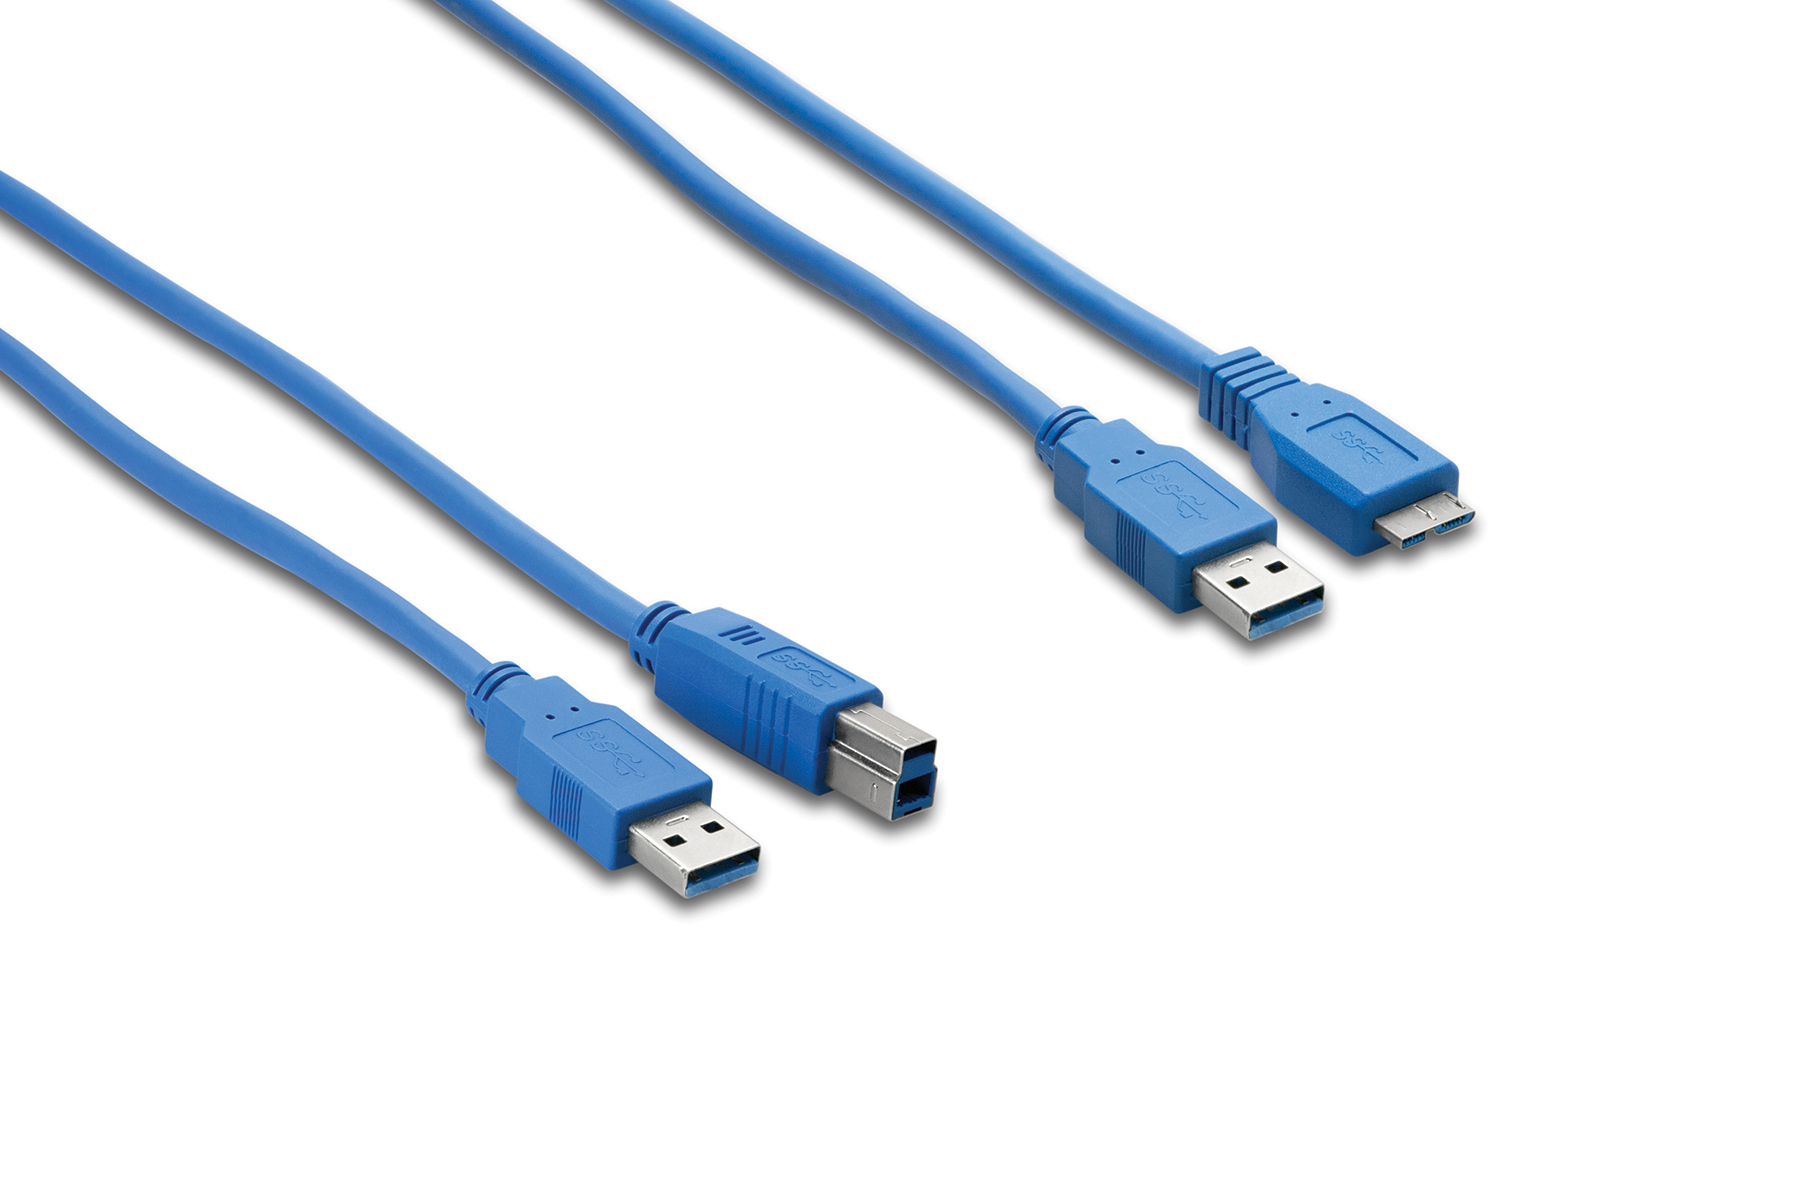 What Is SS USB? – Quick Guide for & Engineers